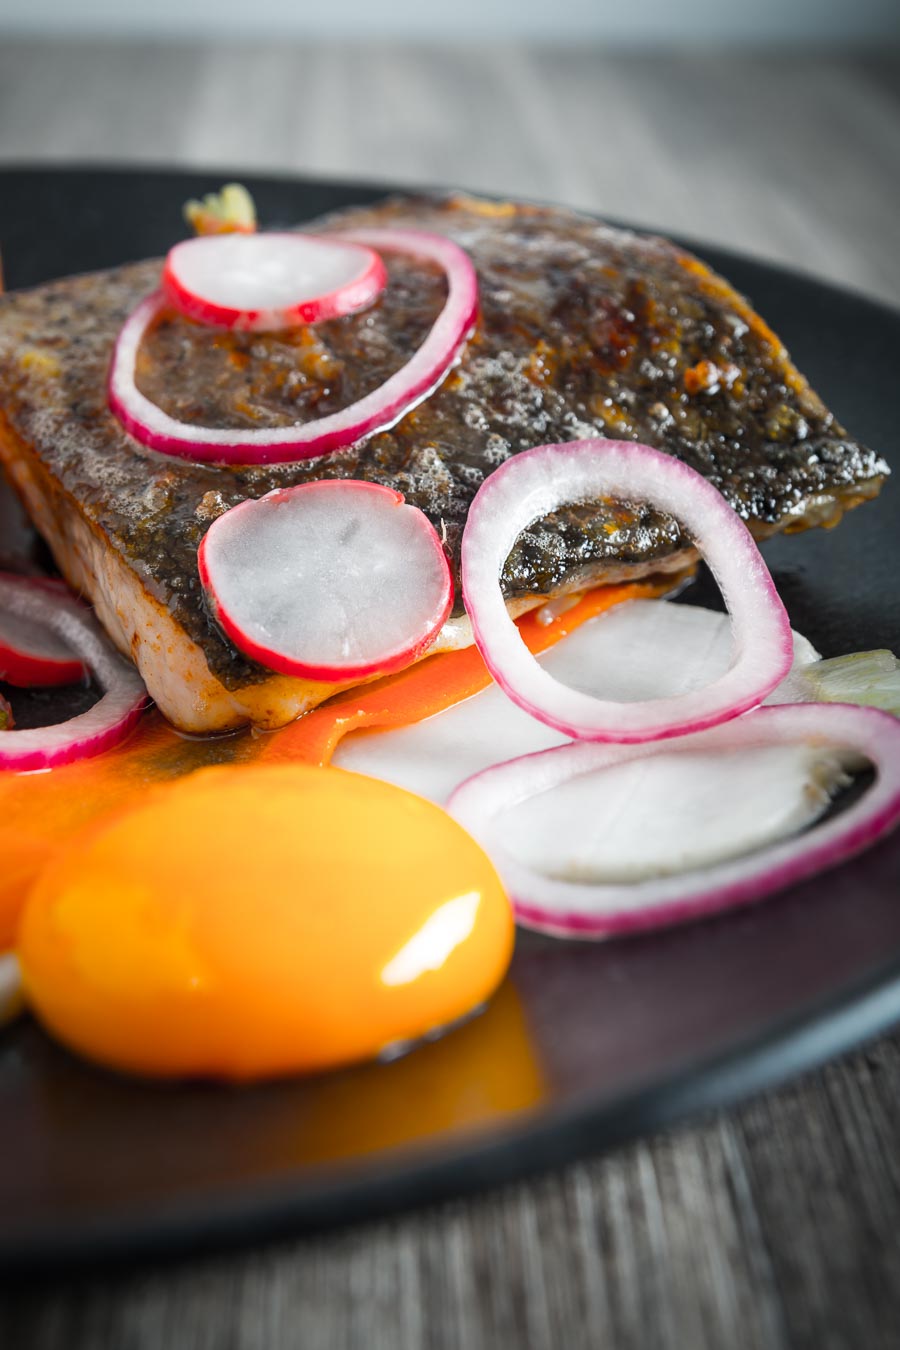 Zander or pike perch is this star of this fancy looking but deceptively simple dish served with a confit egg yolk and is ready in 30 minutes that rocks the start of spring.